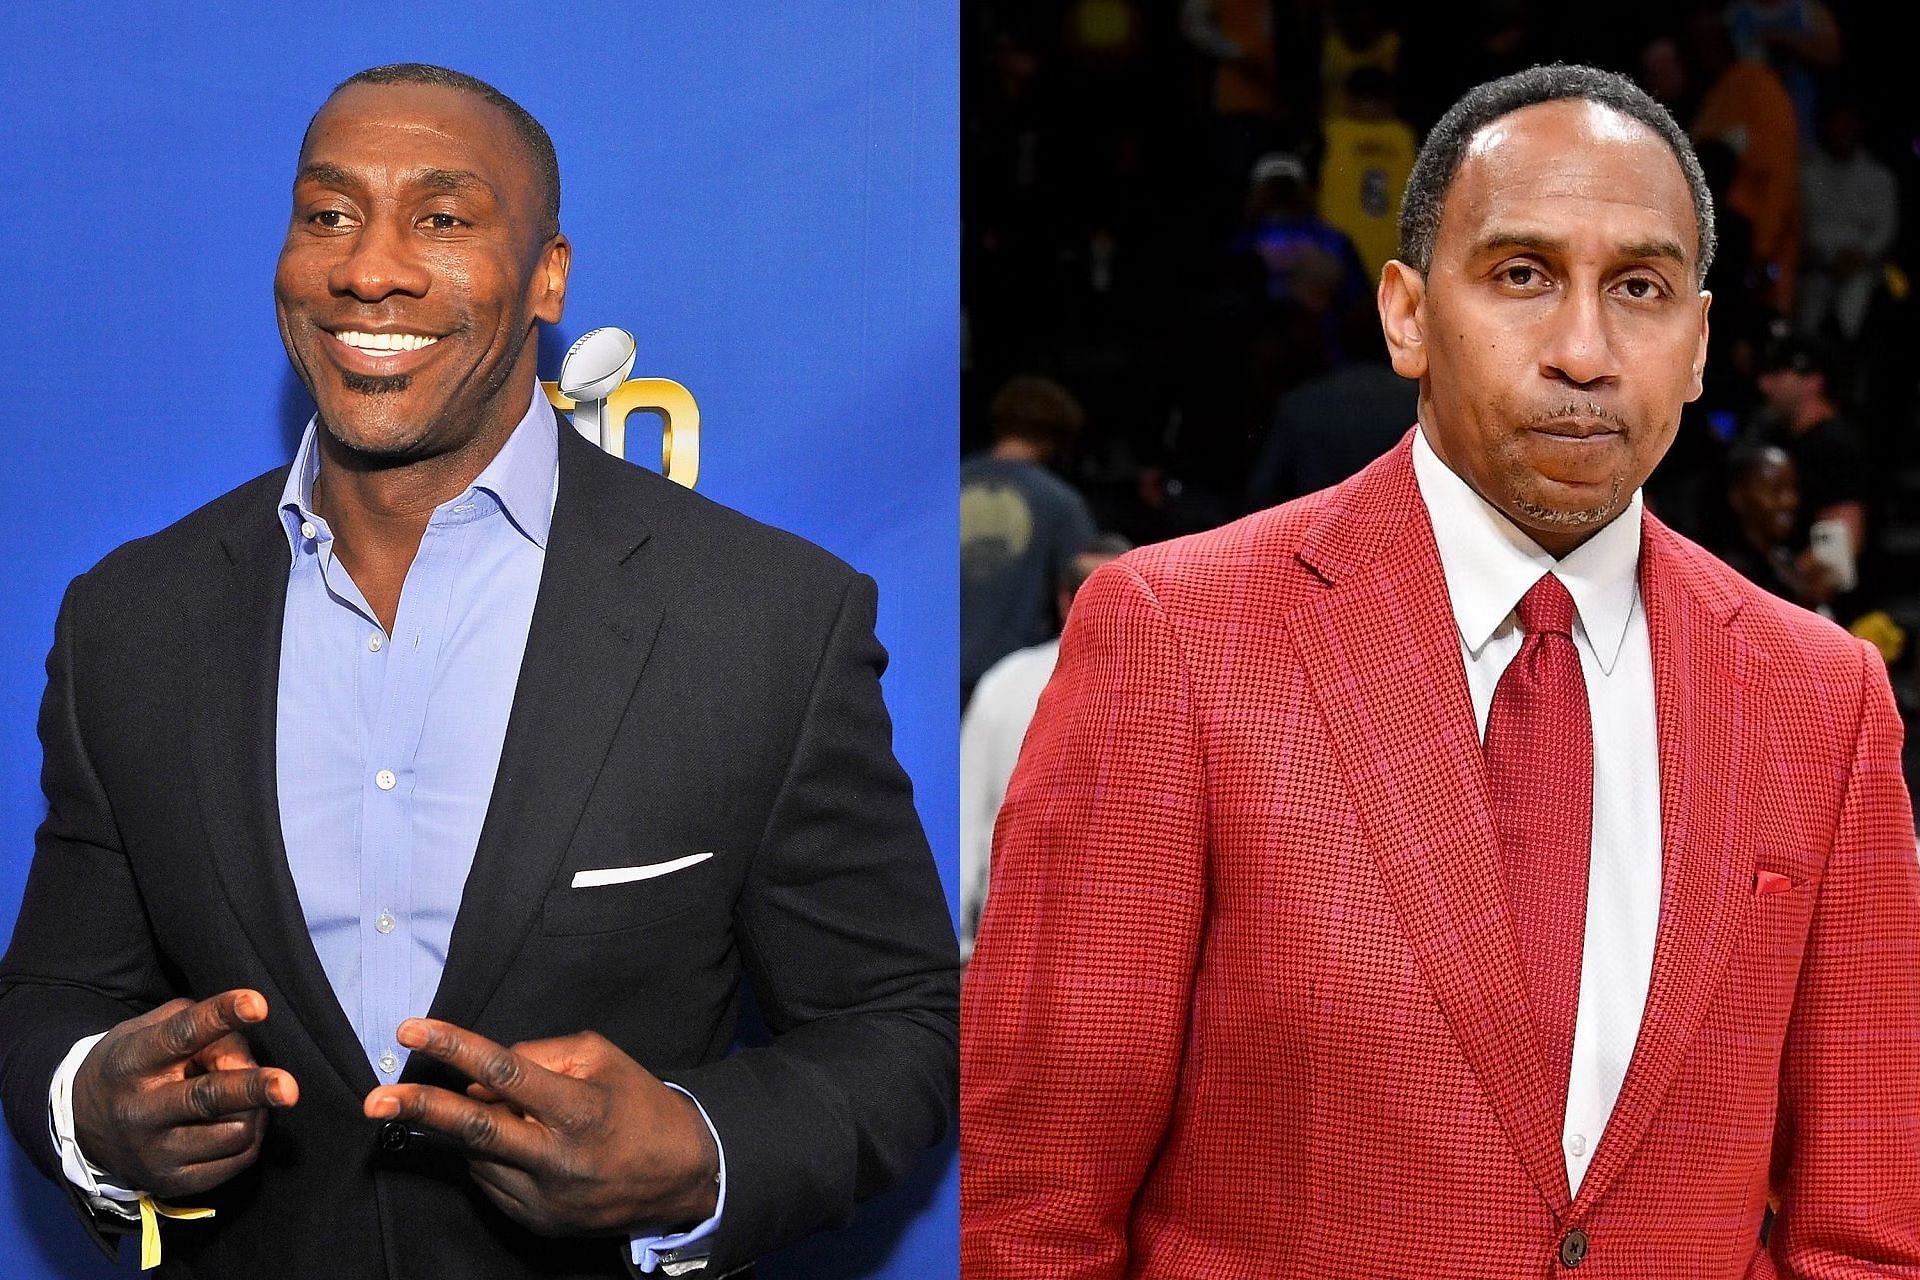 NFL YouTuber shuts down possibility of Shannon Sharpe joining Stephen A. Smith on ESPN